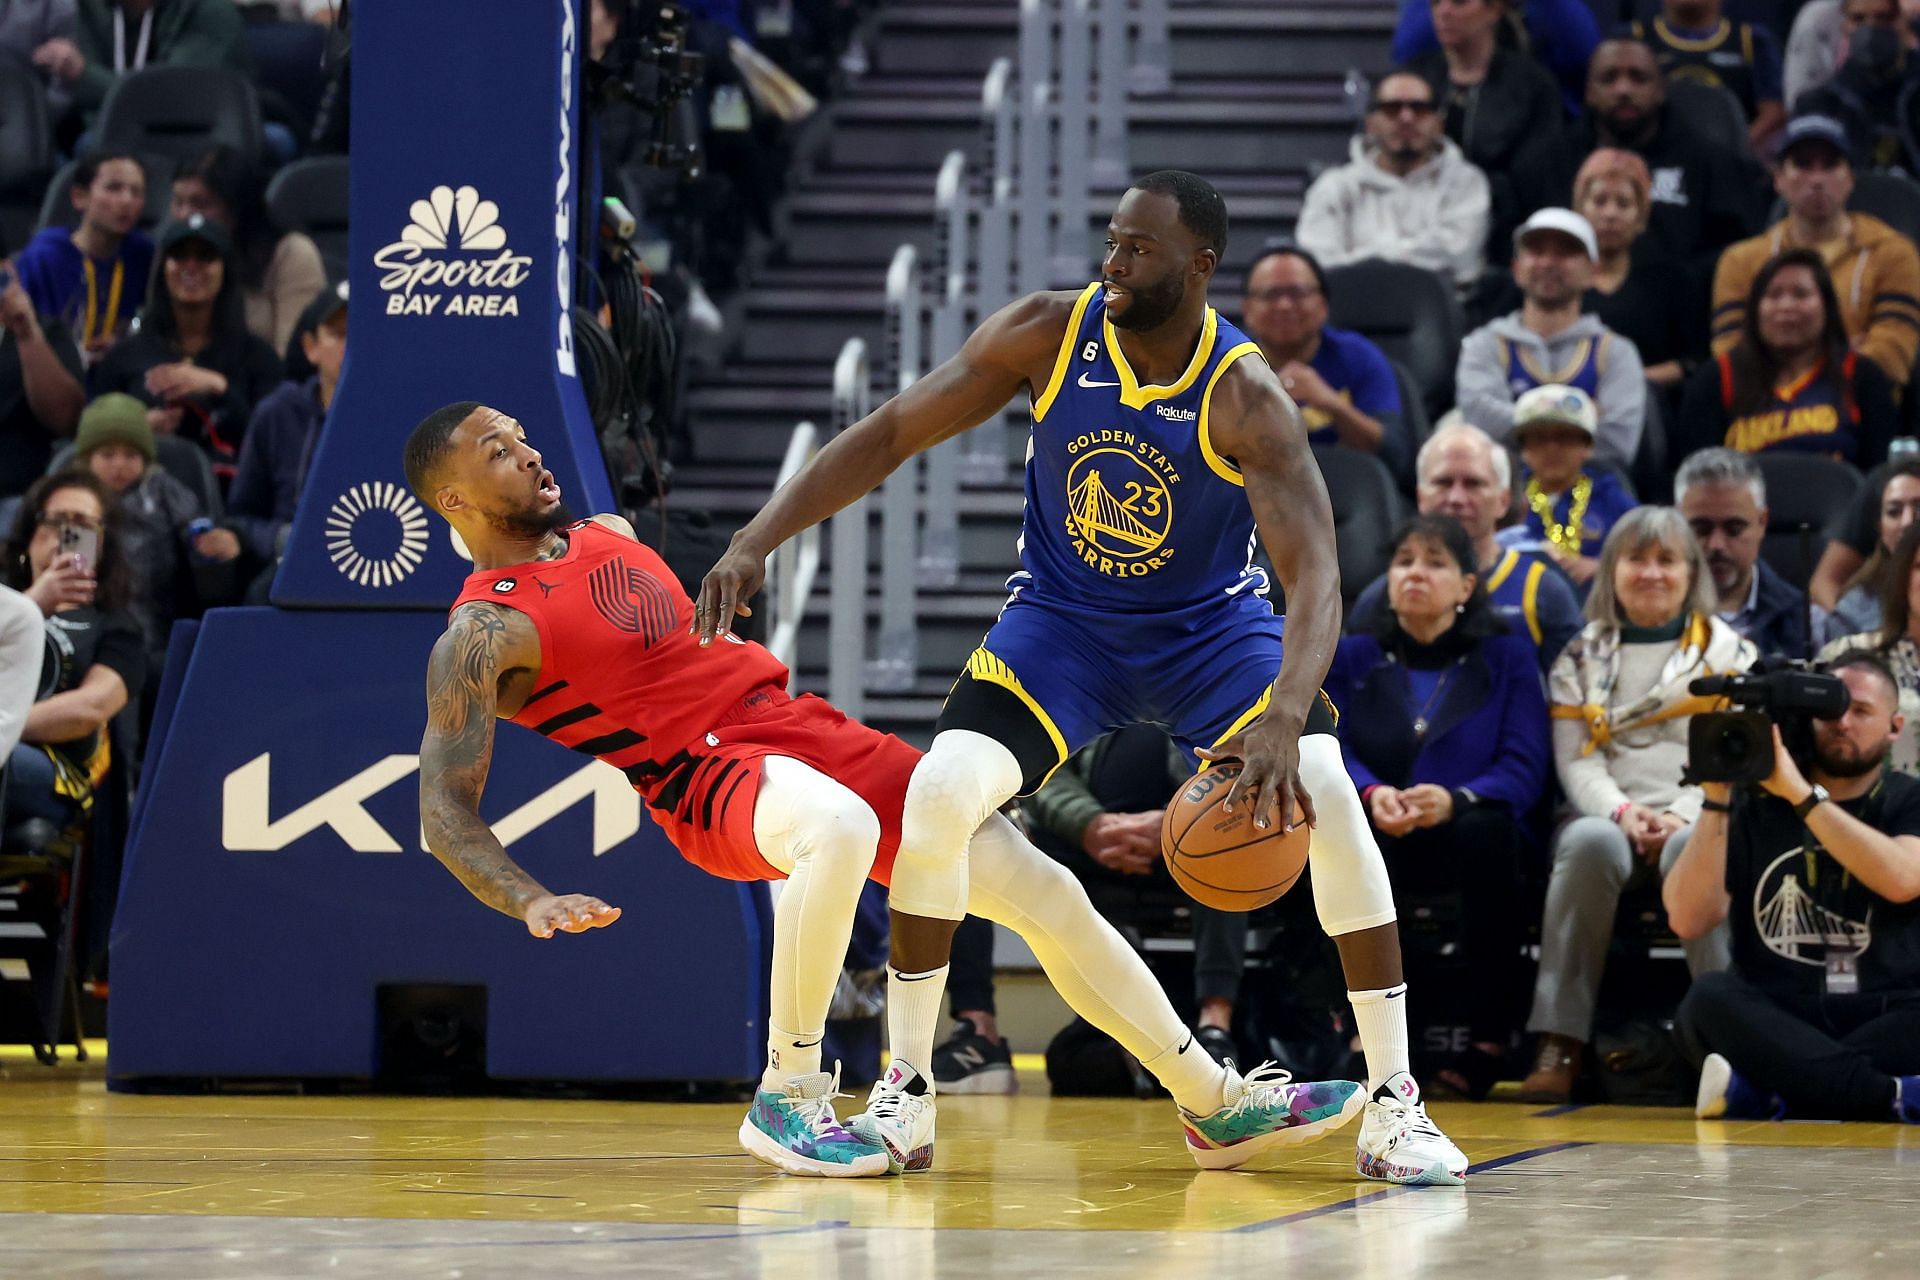 Draymond Green (right) of the Golden State Warriors